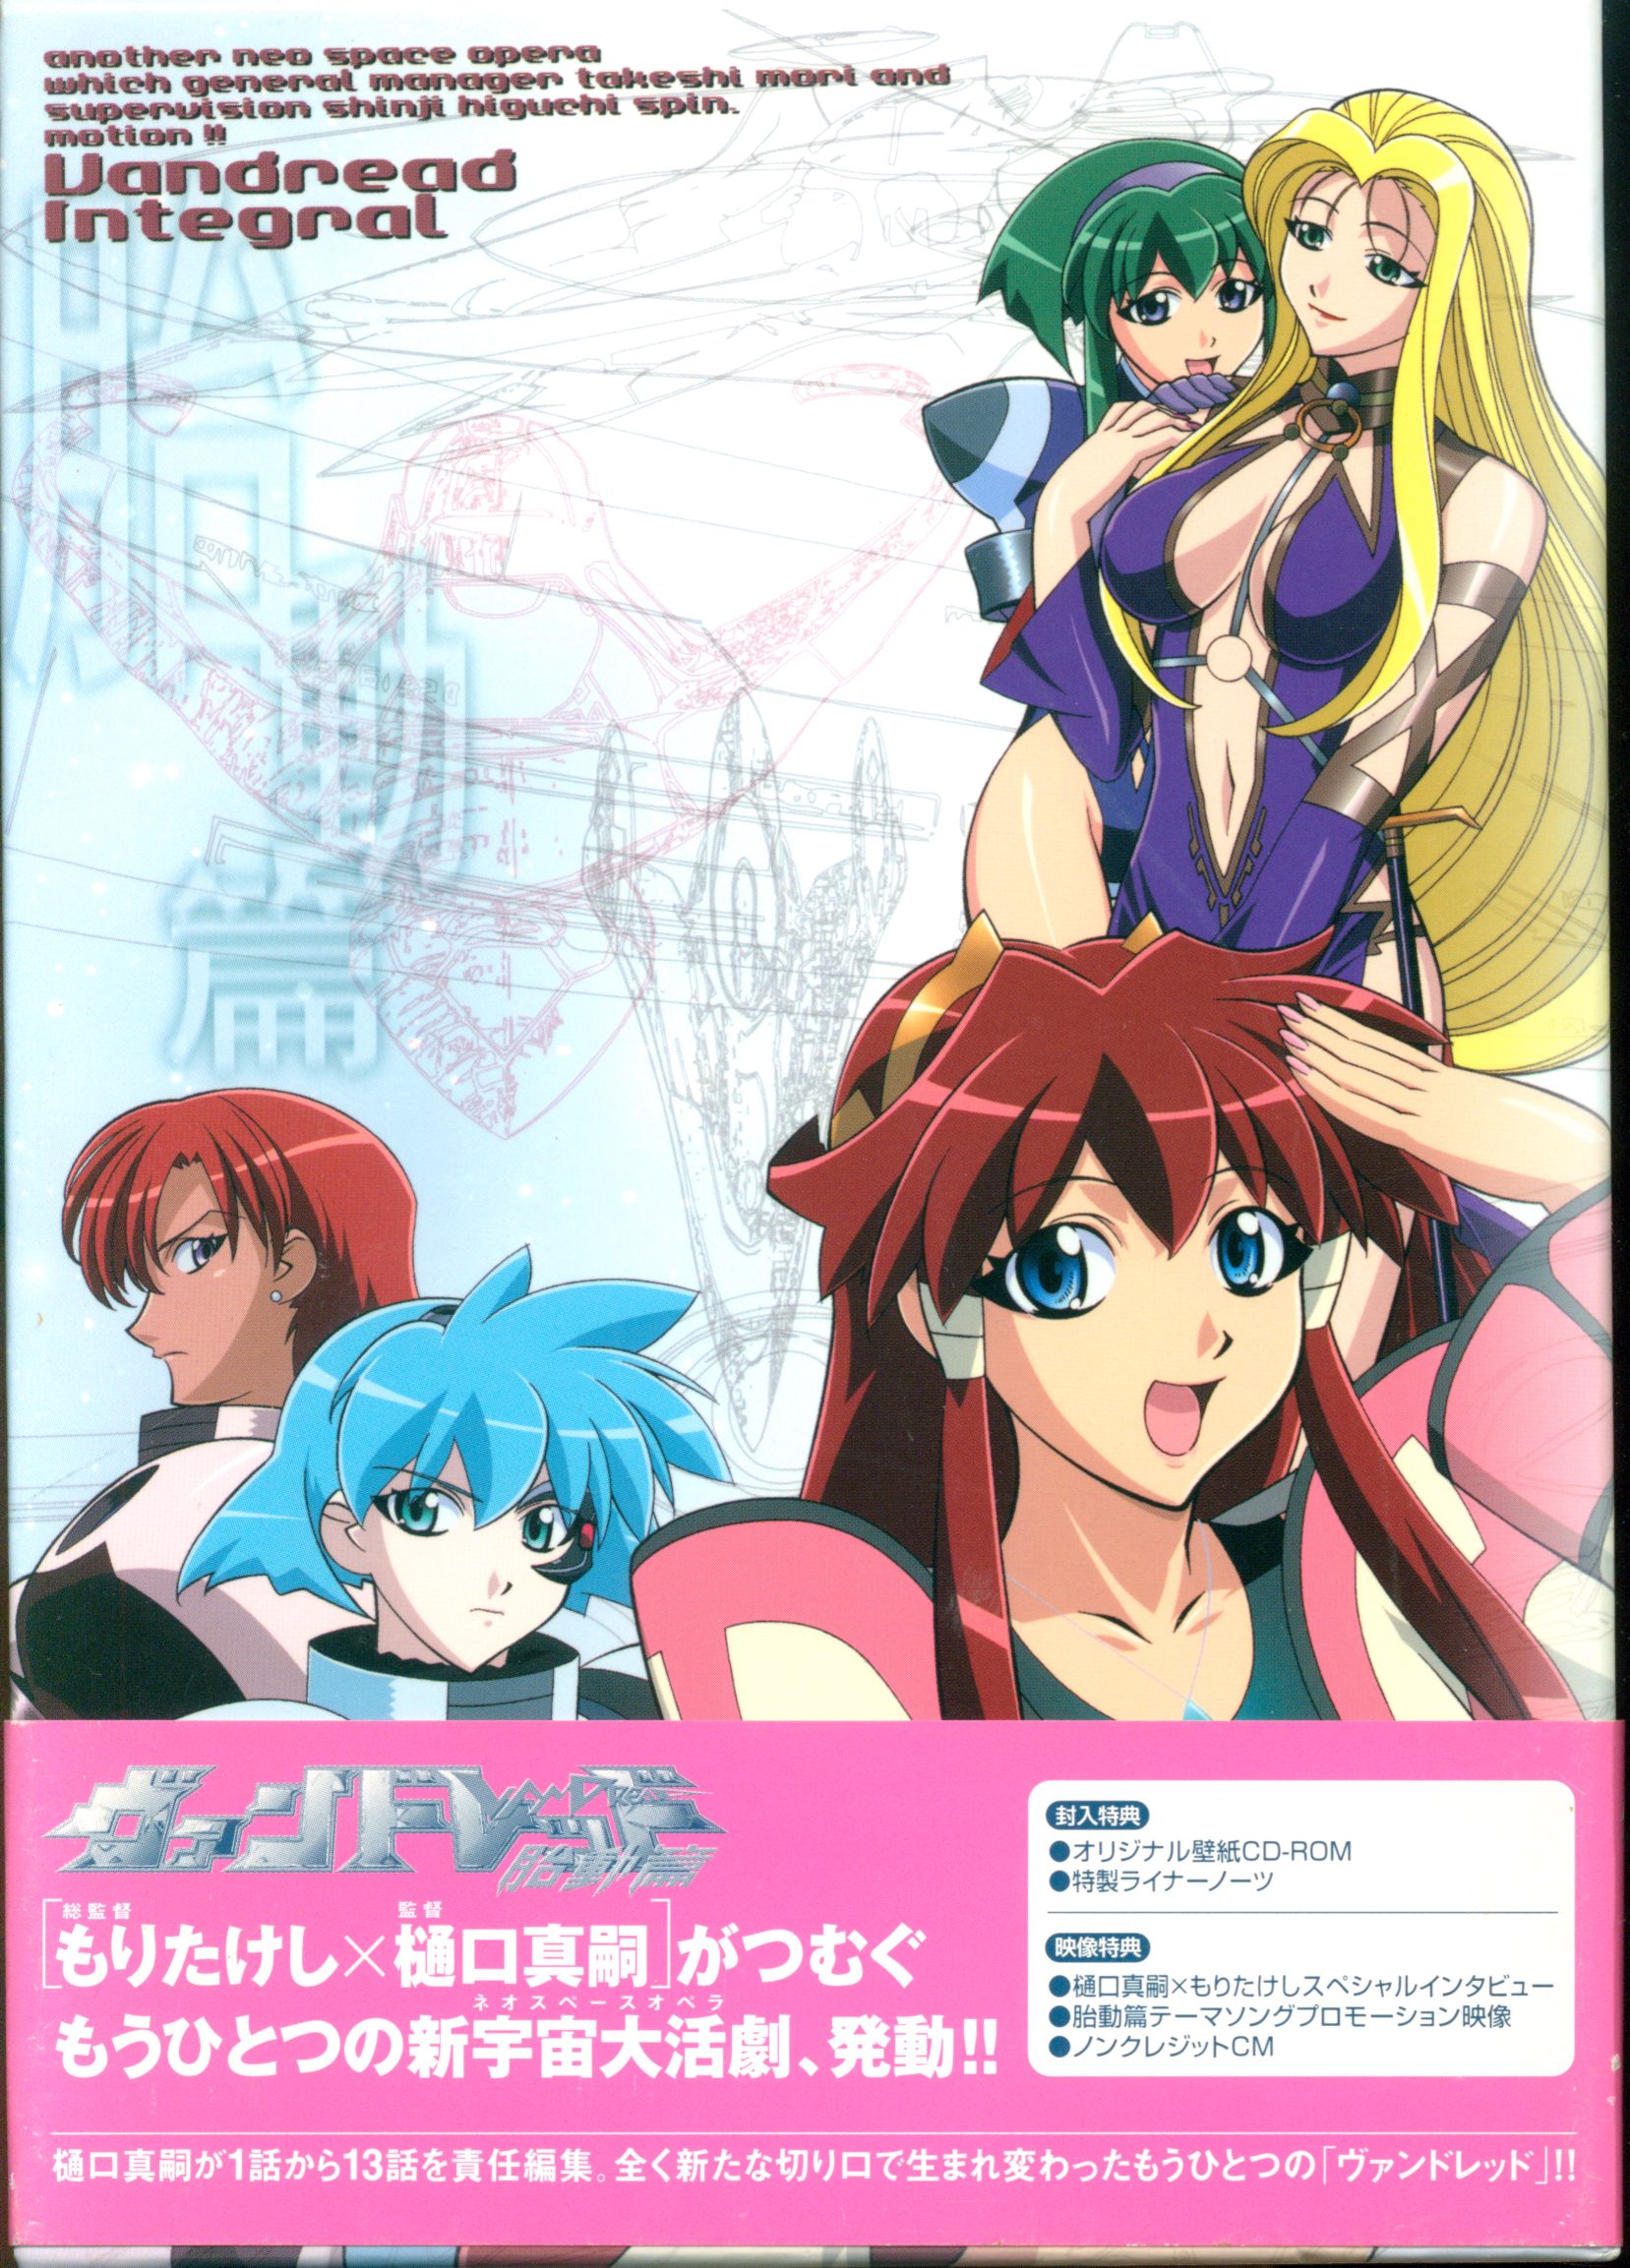 Anime Heaven - Vandread (26 eps 2 seasons) Remember that old tale that men  are from Mars and women are from Venus? Well this decides to take that  theory to another level.